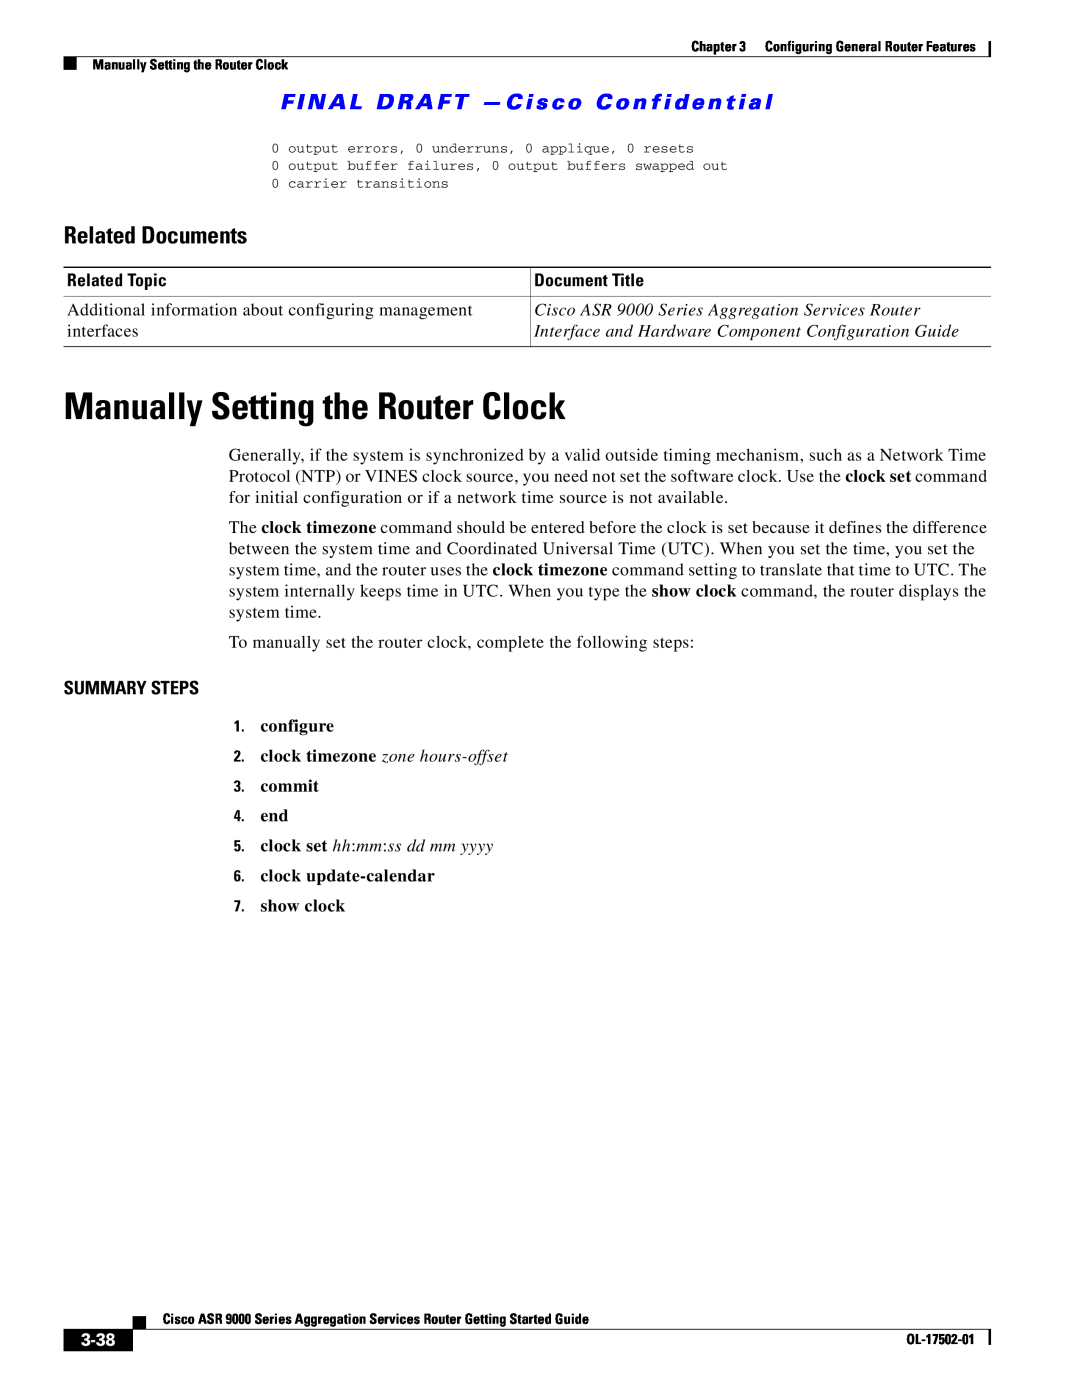 Cisco Systems A9KMOD80TR Manually Setting the Router Clock, Related Documents, clock timezone zone hours-offset, 3-38 